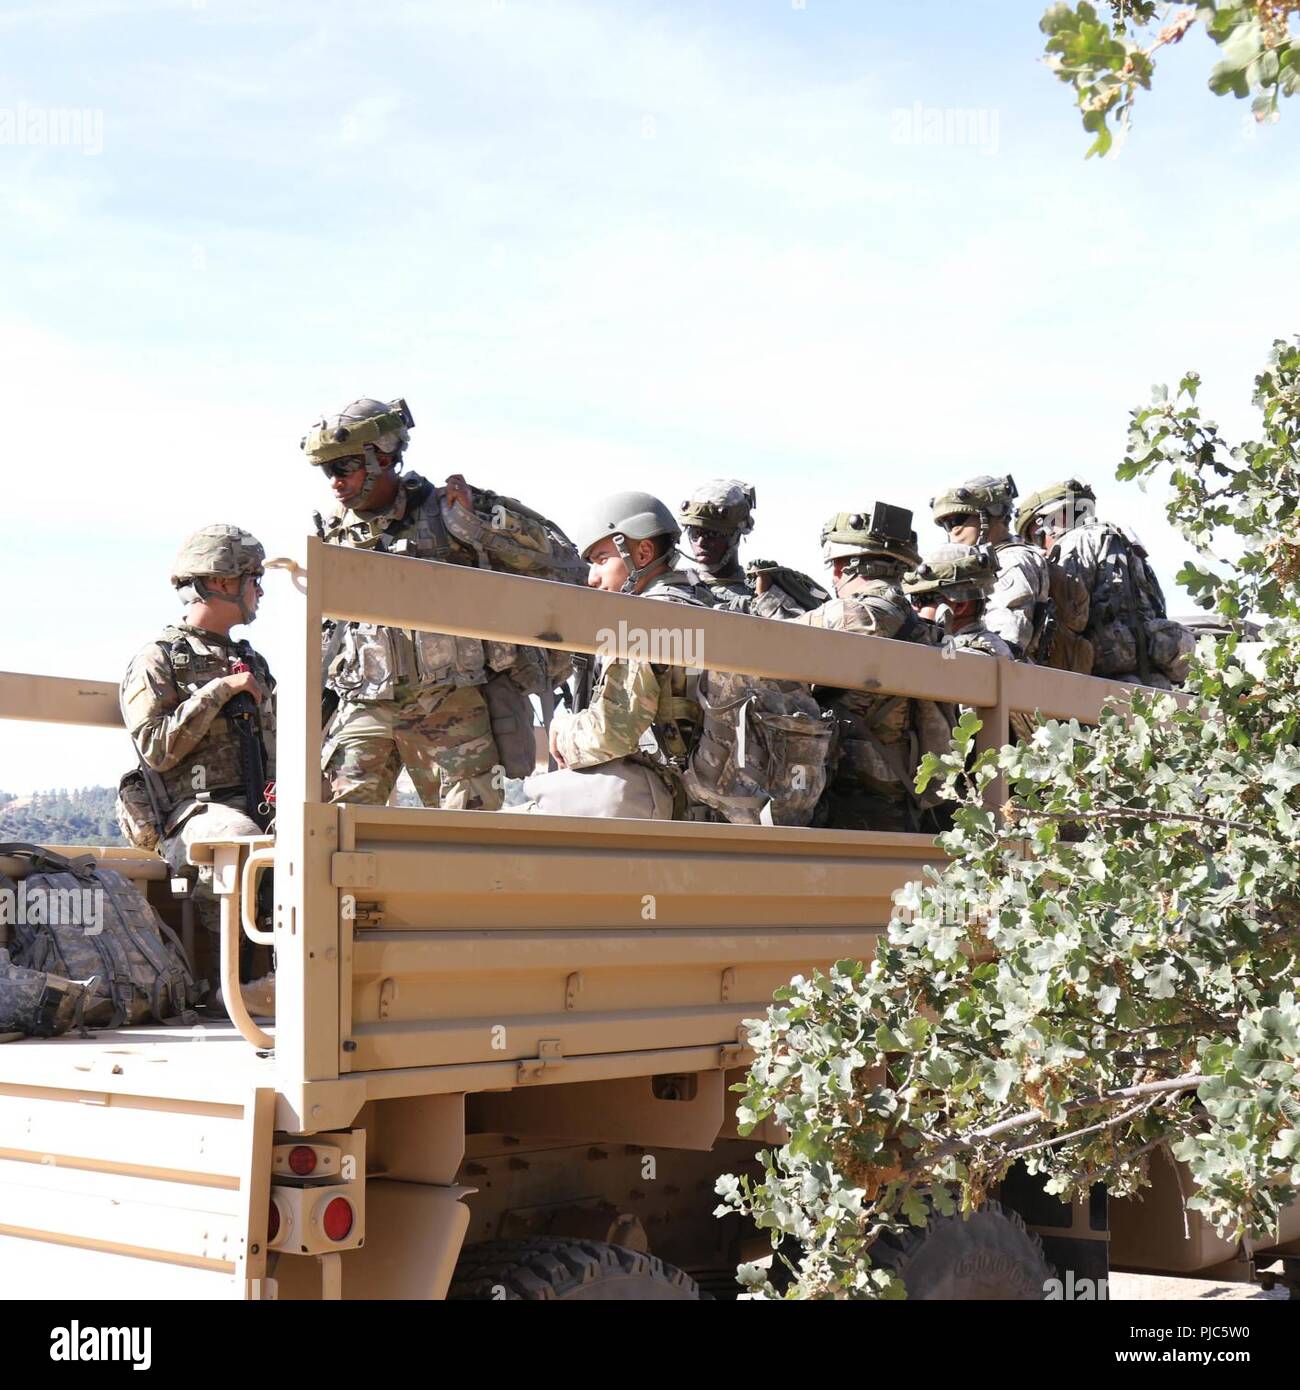 U.S. Army Reserve Soldiers from the 900th Quartermaster Company, headquartered in El Paso, TX, complete a convoy during CSTX 91-18-01, July 10, 2018, at Fort Hunter Liggett, CA.  CSTX 91-18-01 is a Combat Support Training Exercise that ensures America’s Army Reserve units and Soldiers are trained and ready to deploy on short-notice and bring capable, combat-ready, and lethal firepower in support of the Army and our joint partners anywhere in the world. Stock Photo